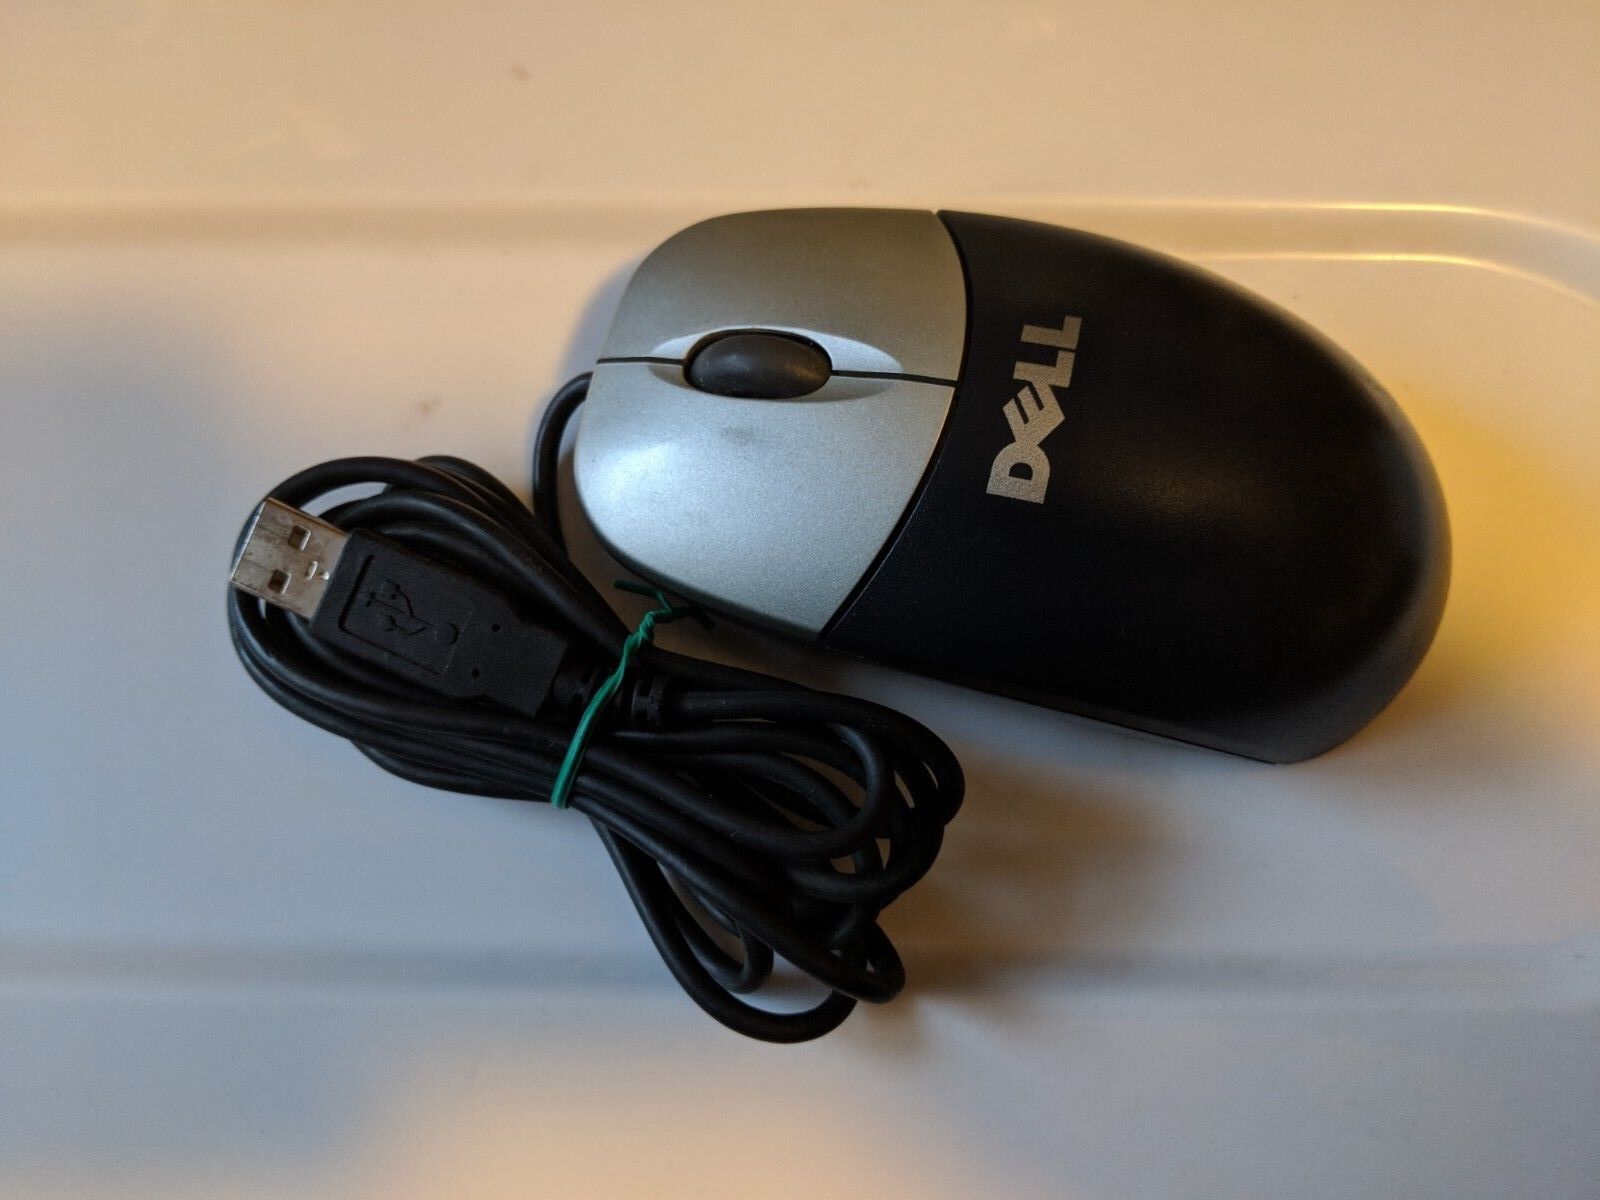 Genuine Dell (MO56UO) USB Wired Optical Laser Standard Black/Silver Mouse m-24